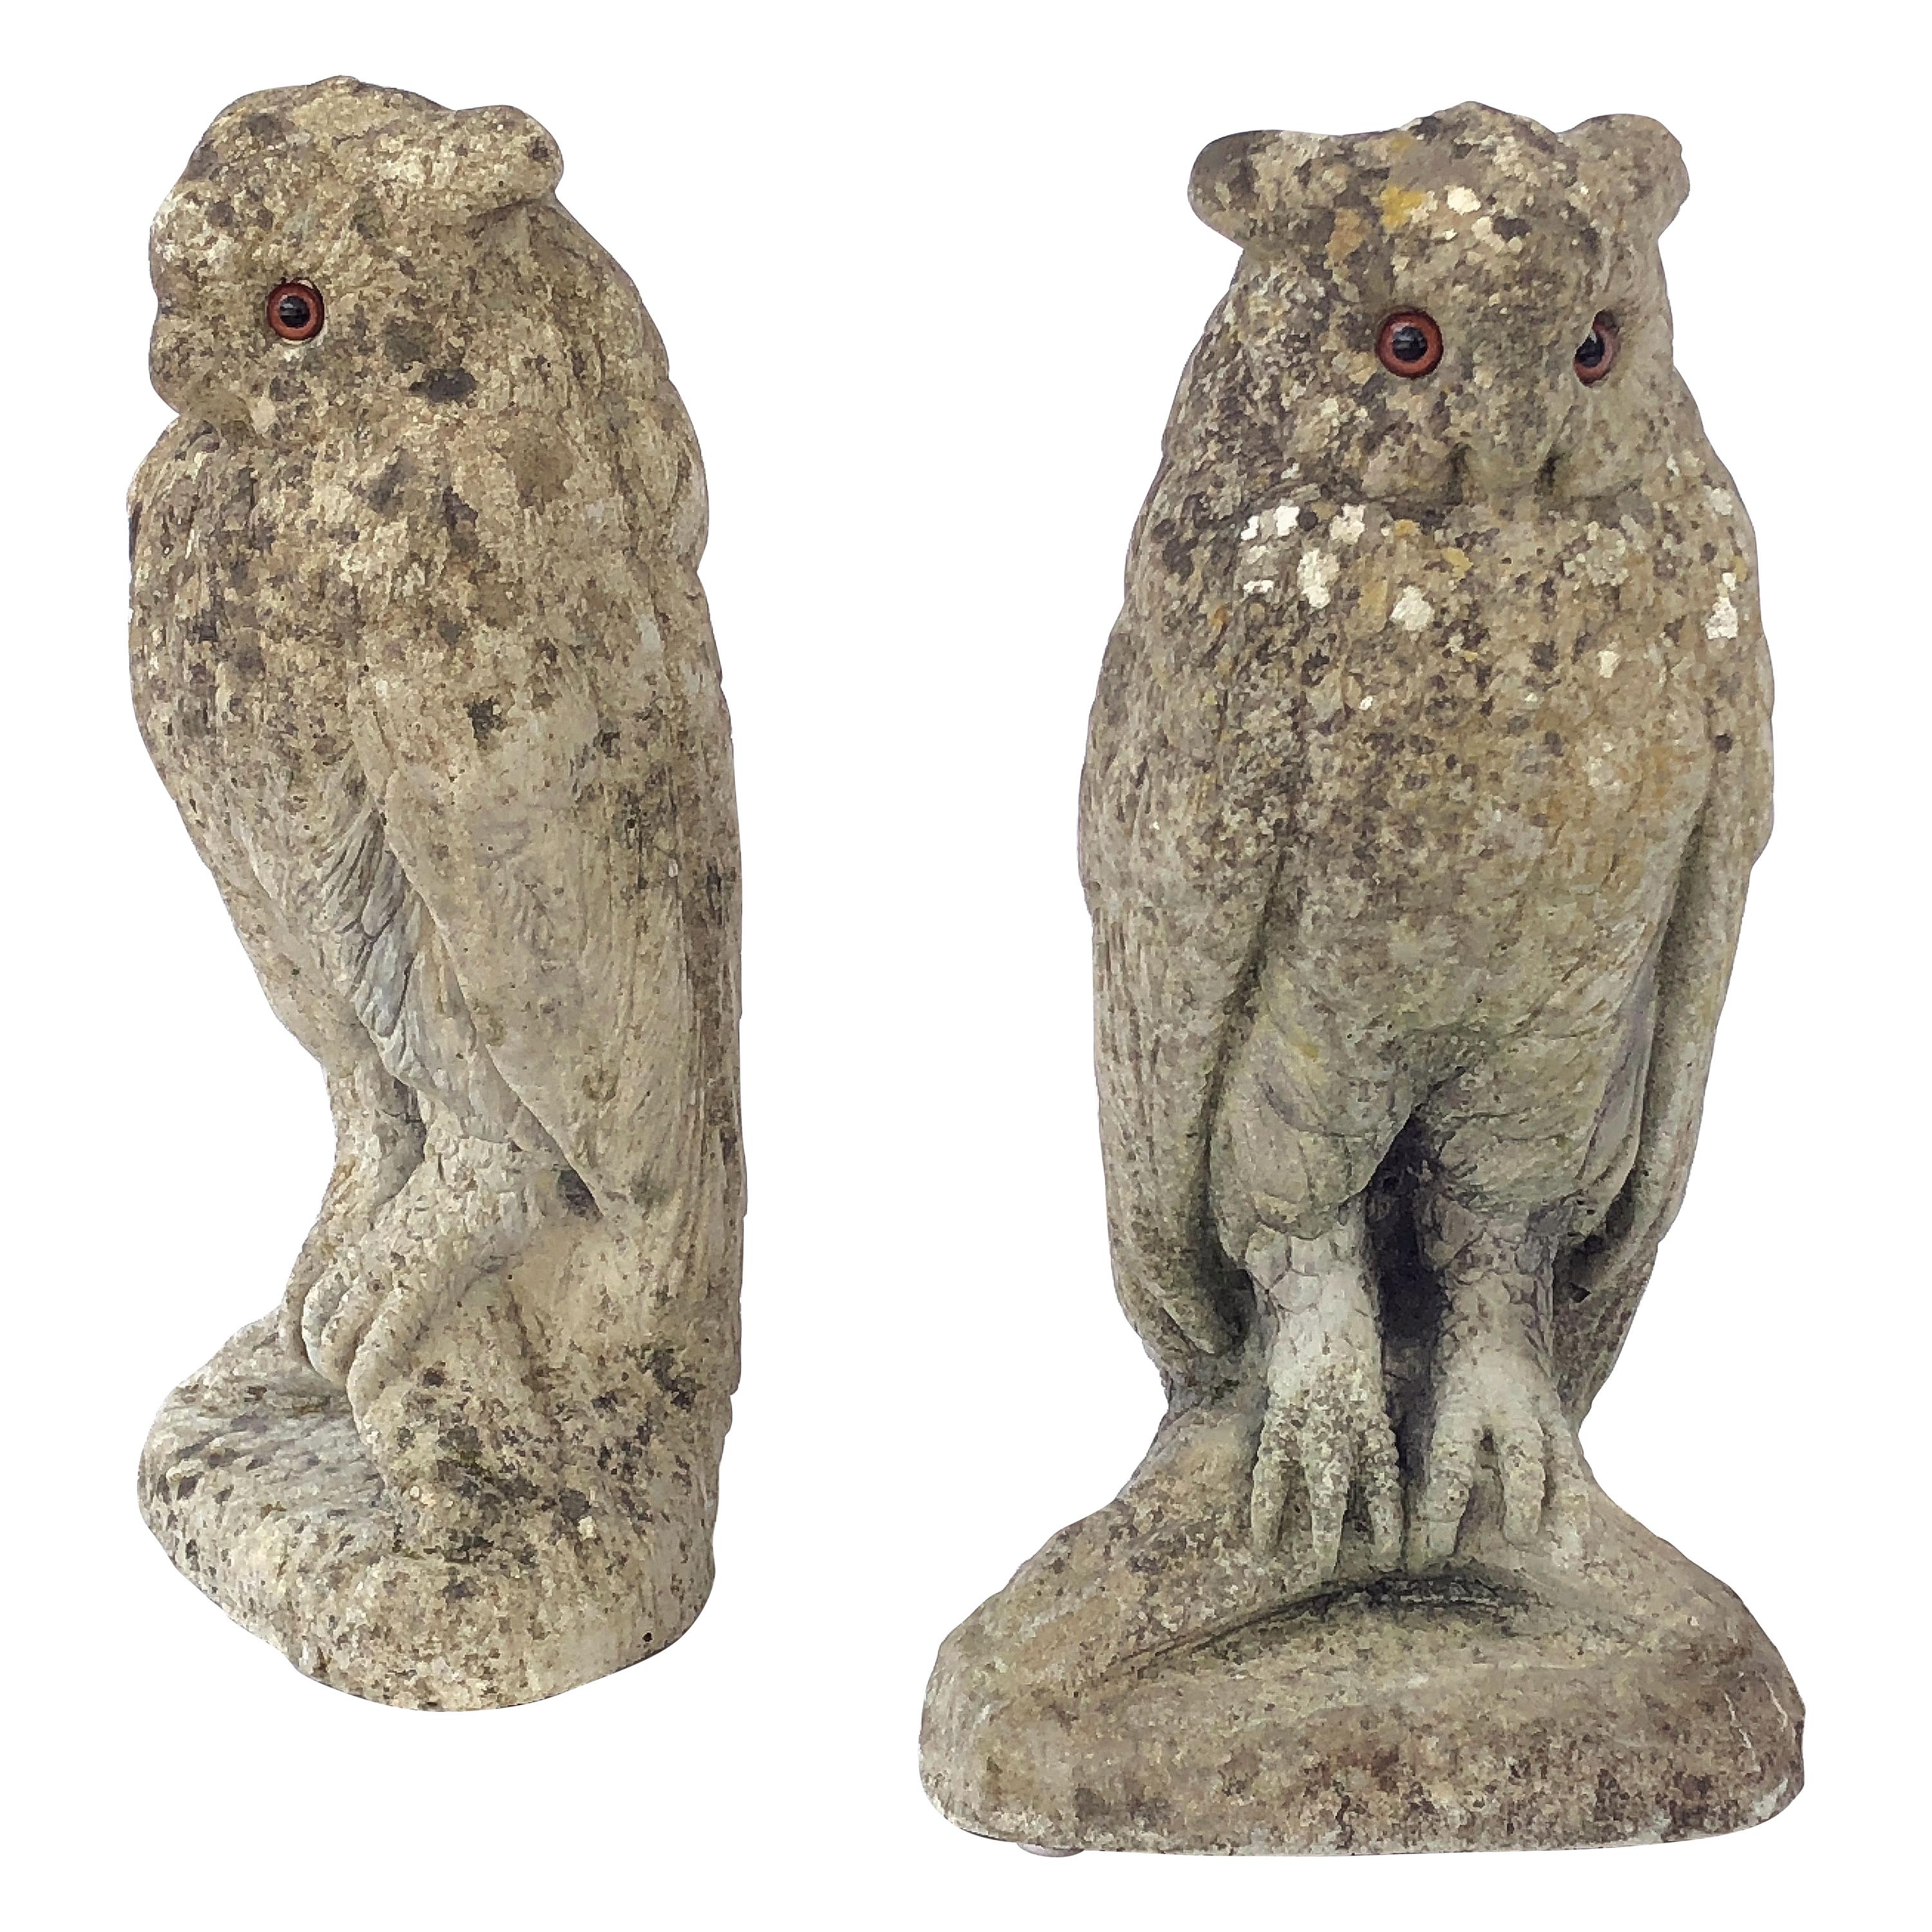 Large English Garden Stone Owl Statues with Glass Eyes 'Individually Priced'